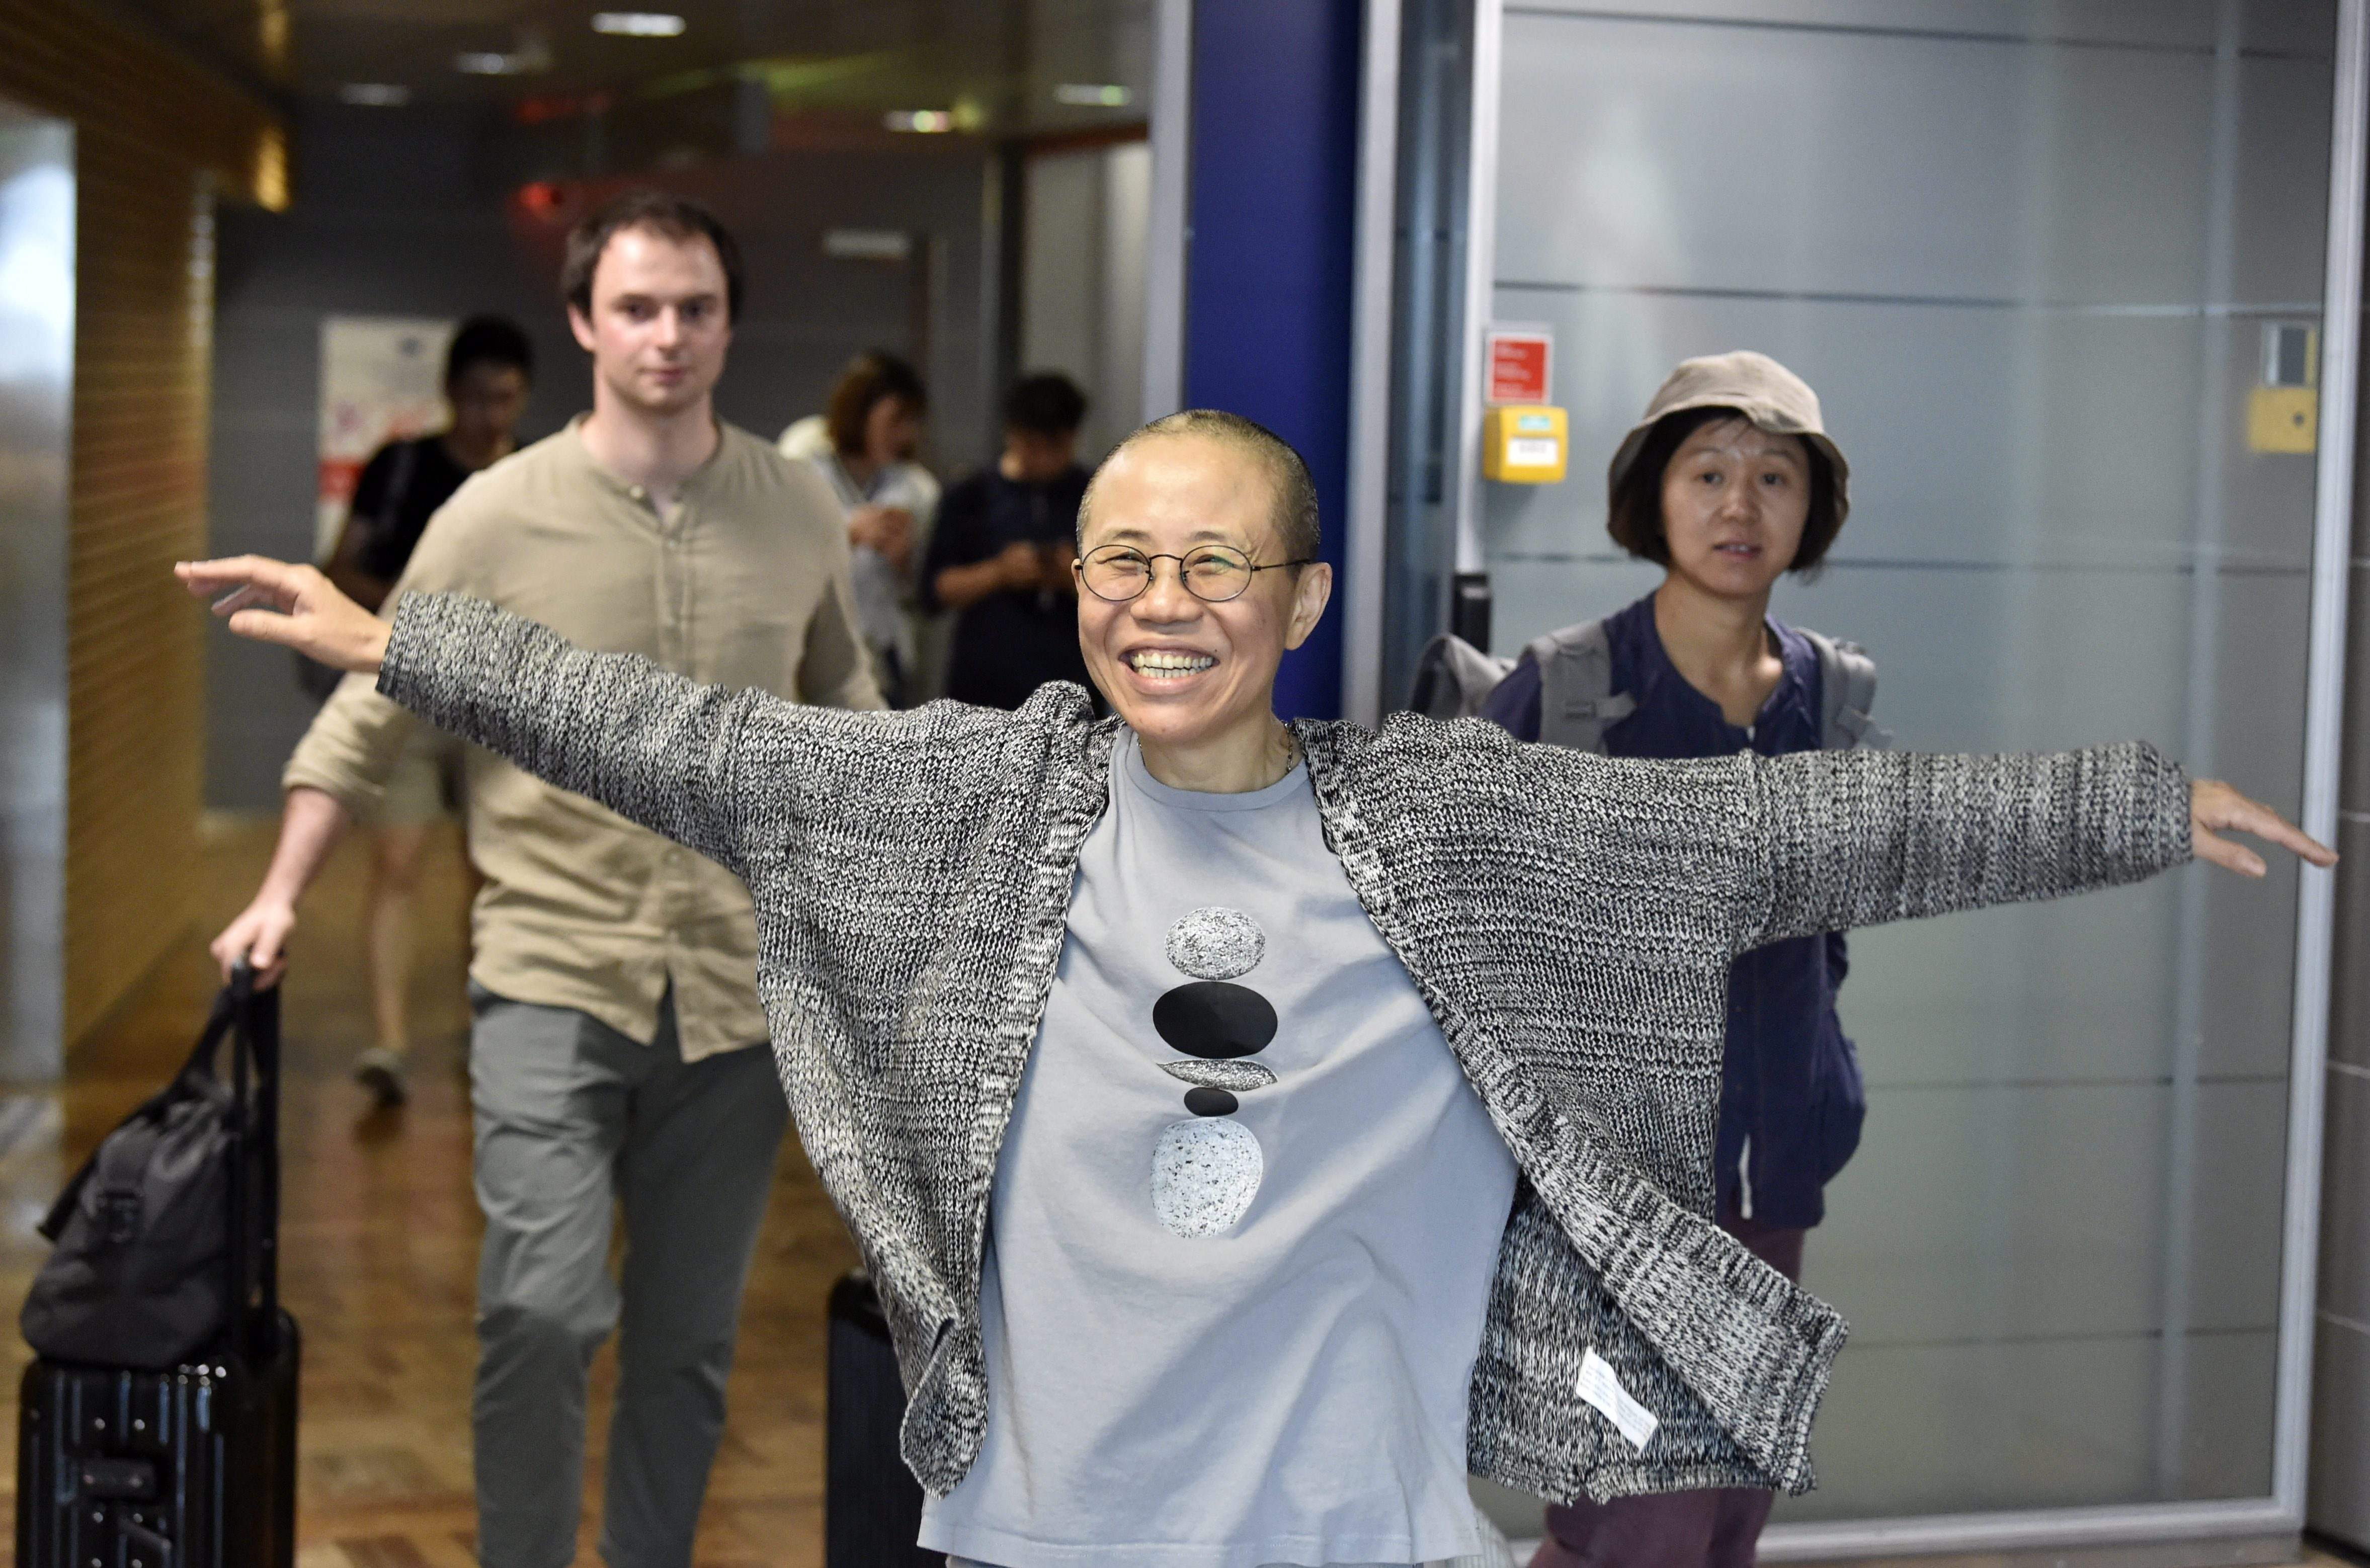 Liu Xia, the widow of Chinese Nobel dissident Liu Xiaobo, smiles as she arrives at the Helsinki International Airport in Vantaa, Finland. Despite facing no charges, the 57-year-old poet had endured heavy restrictions on her movements since 2010 when 